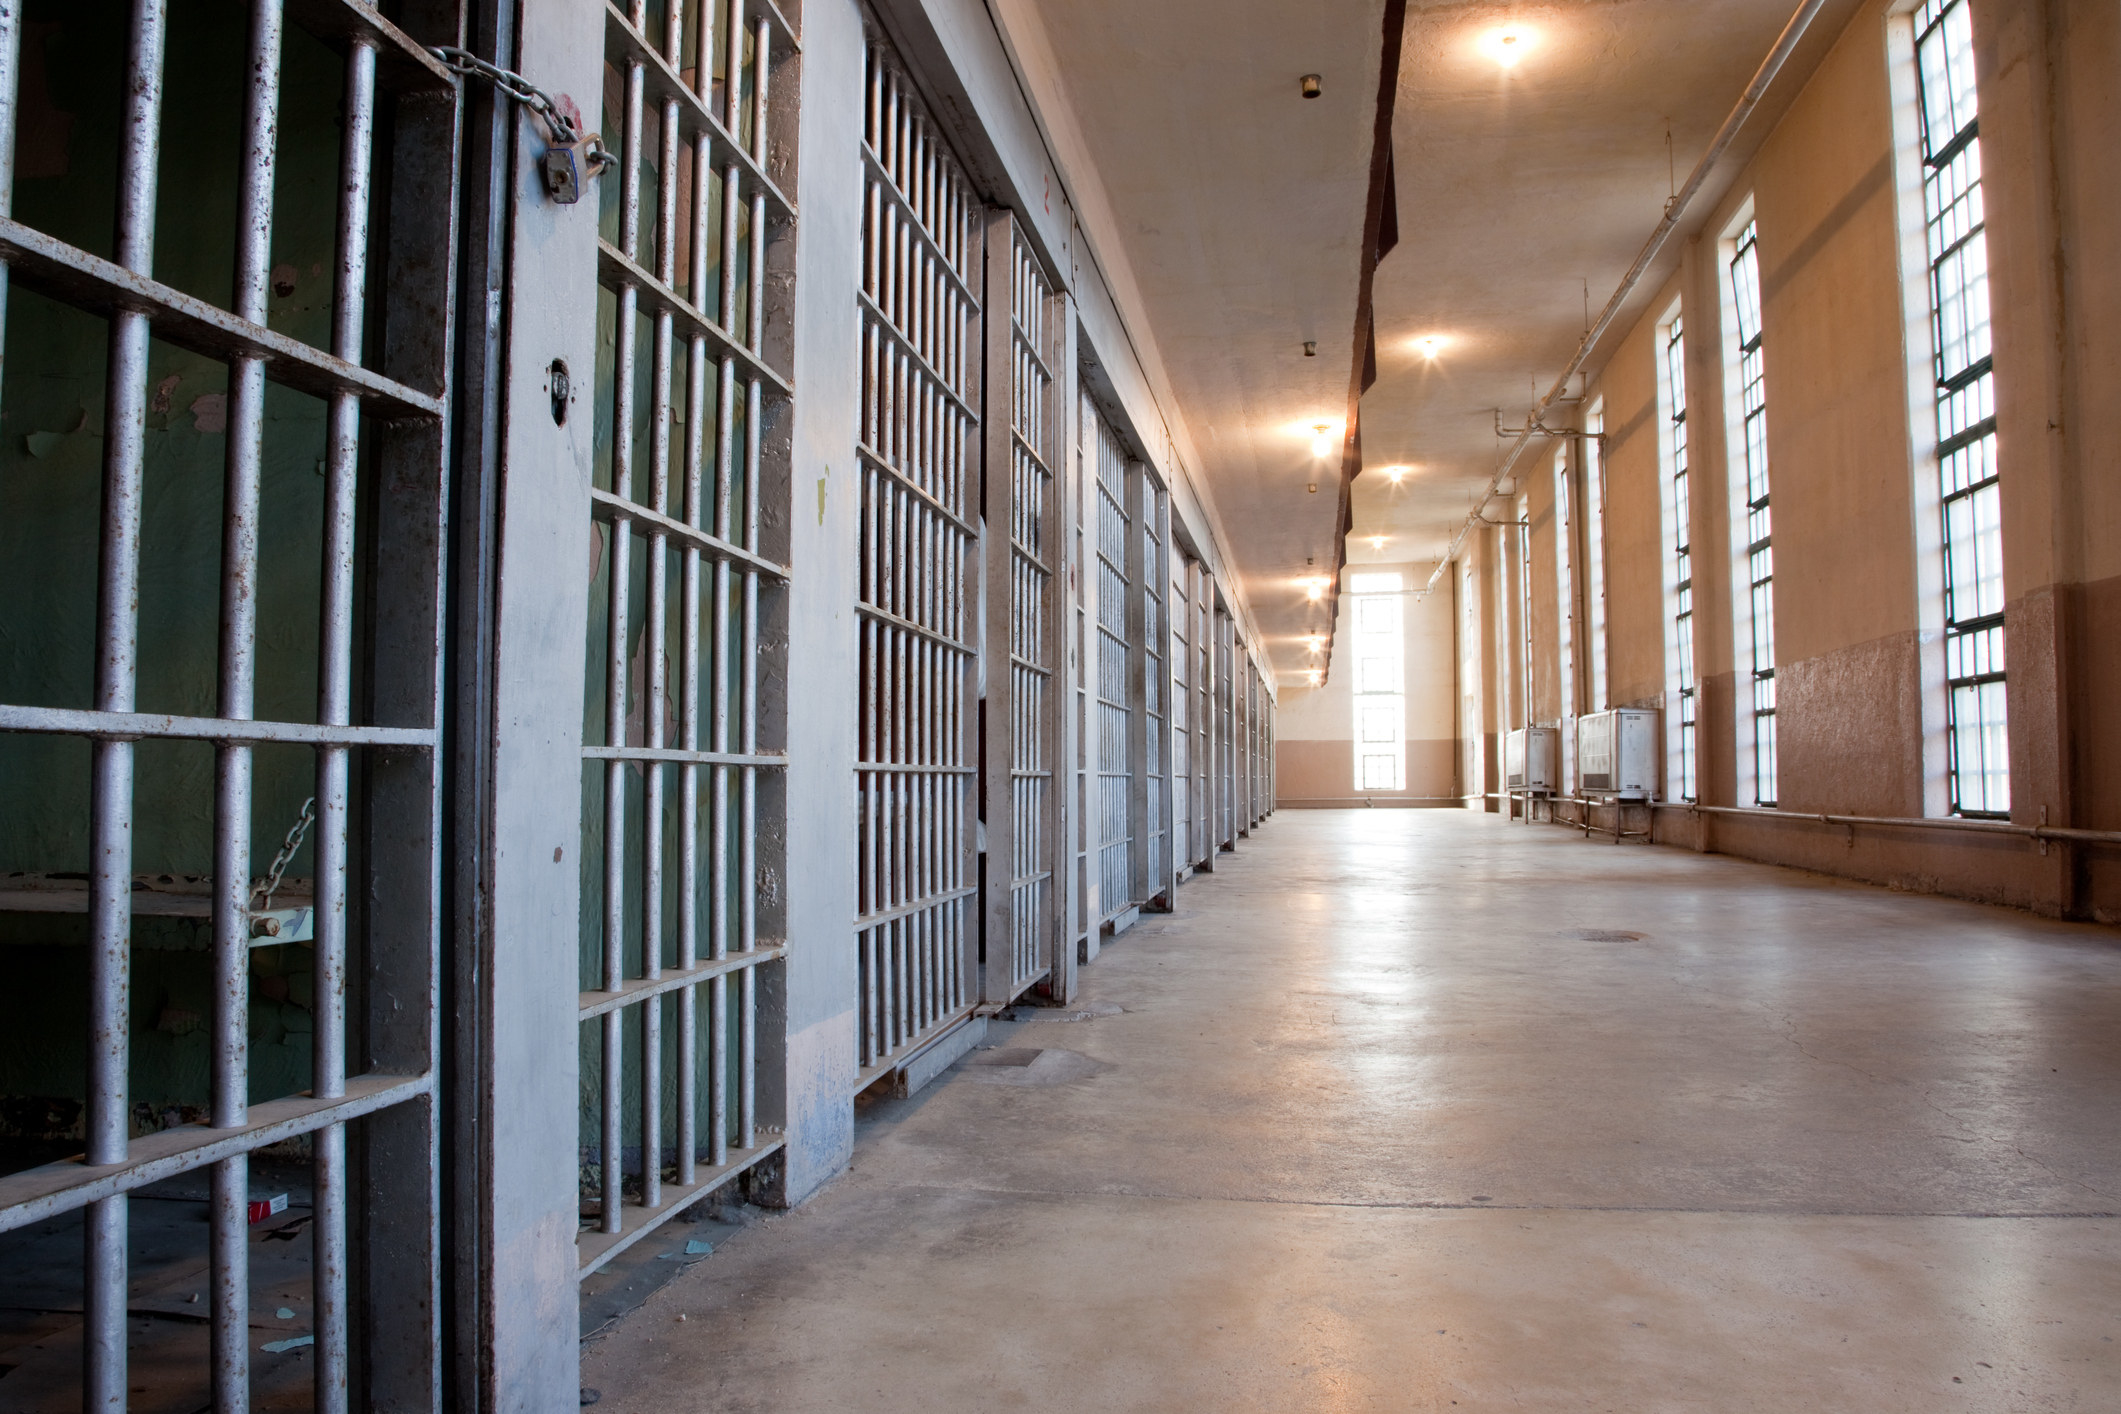 Jail cells on the left in the hallway of a state prison